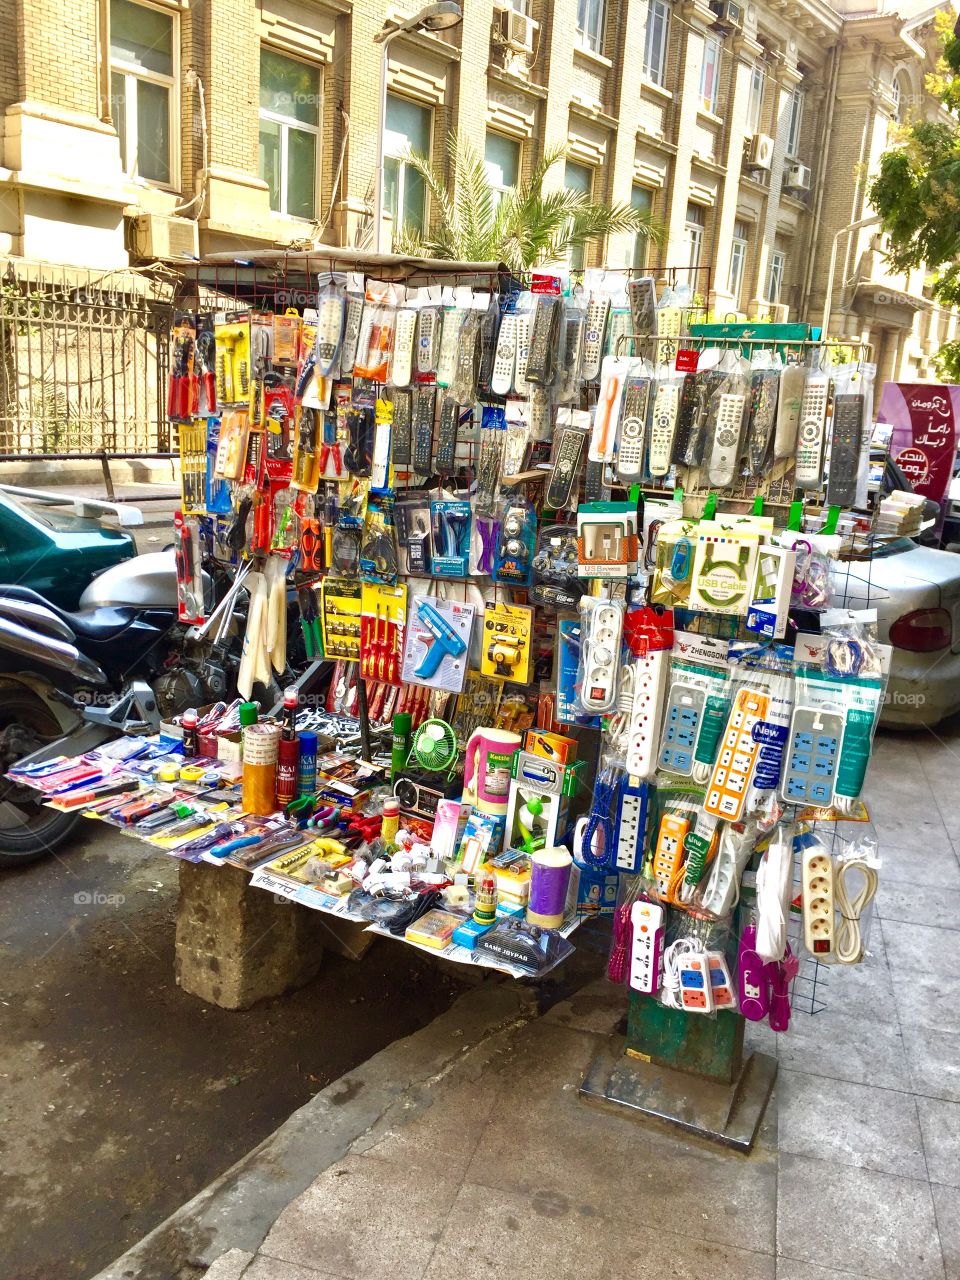 Surprise to see this stall selling electrical stuff at Cairo street 